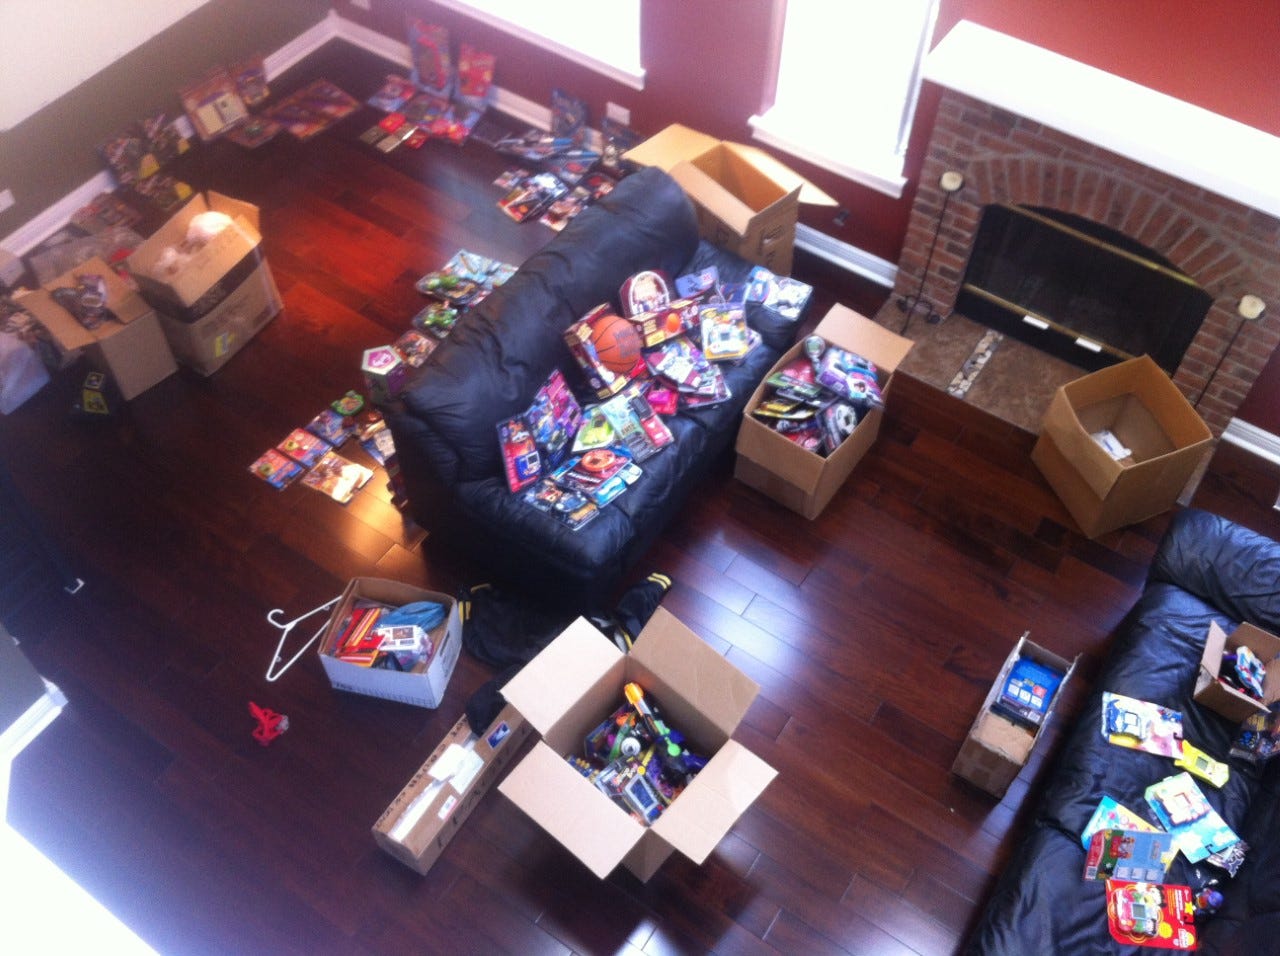 An overview of Chris's living room in his old house displaying around 80 percent of all the toys he made. He estimates there are over 160 different toys in this image!